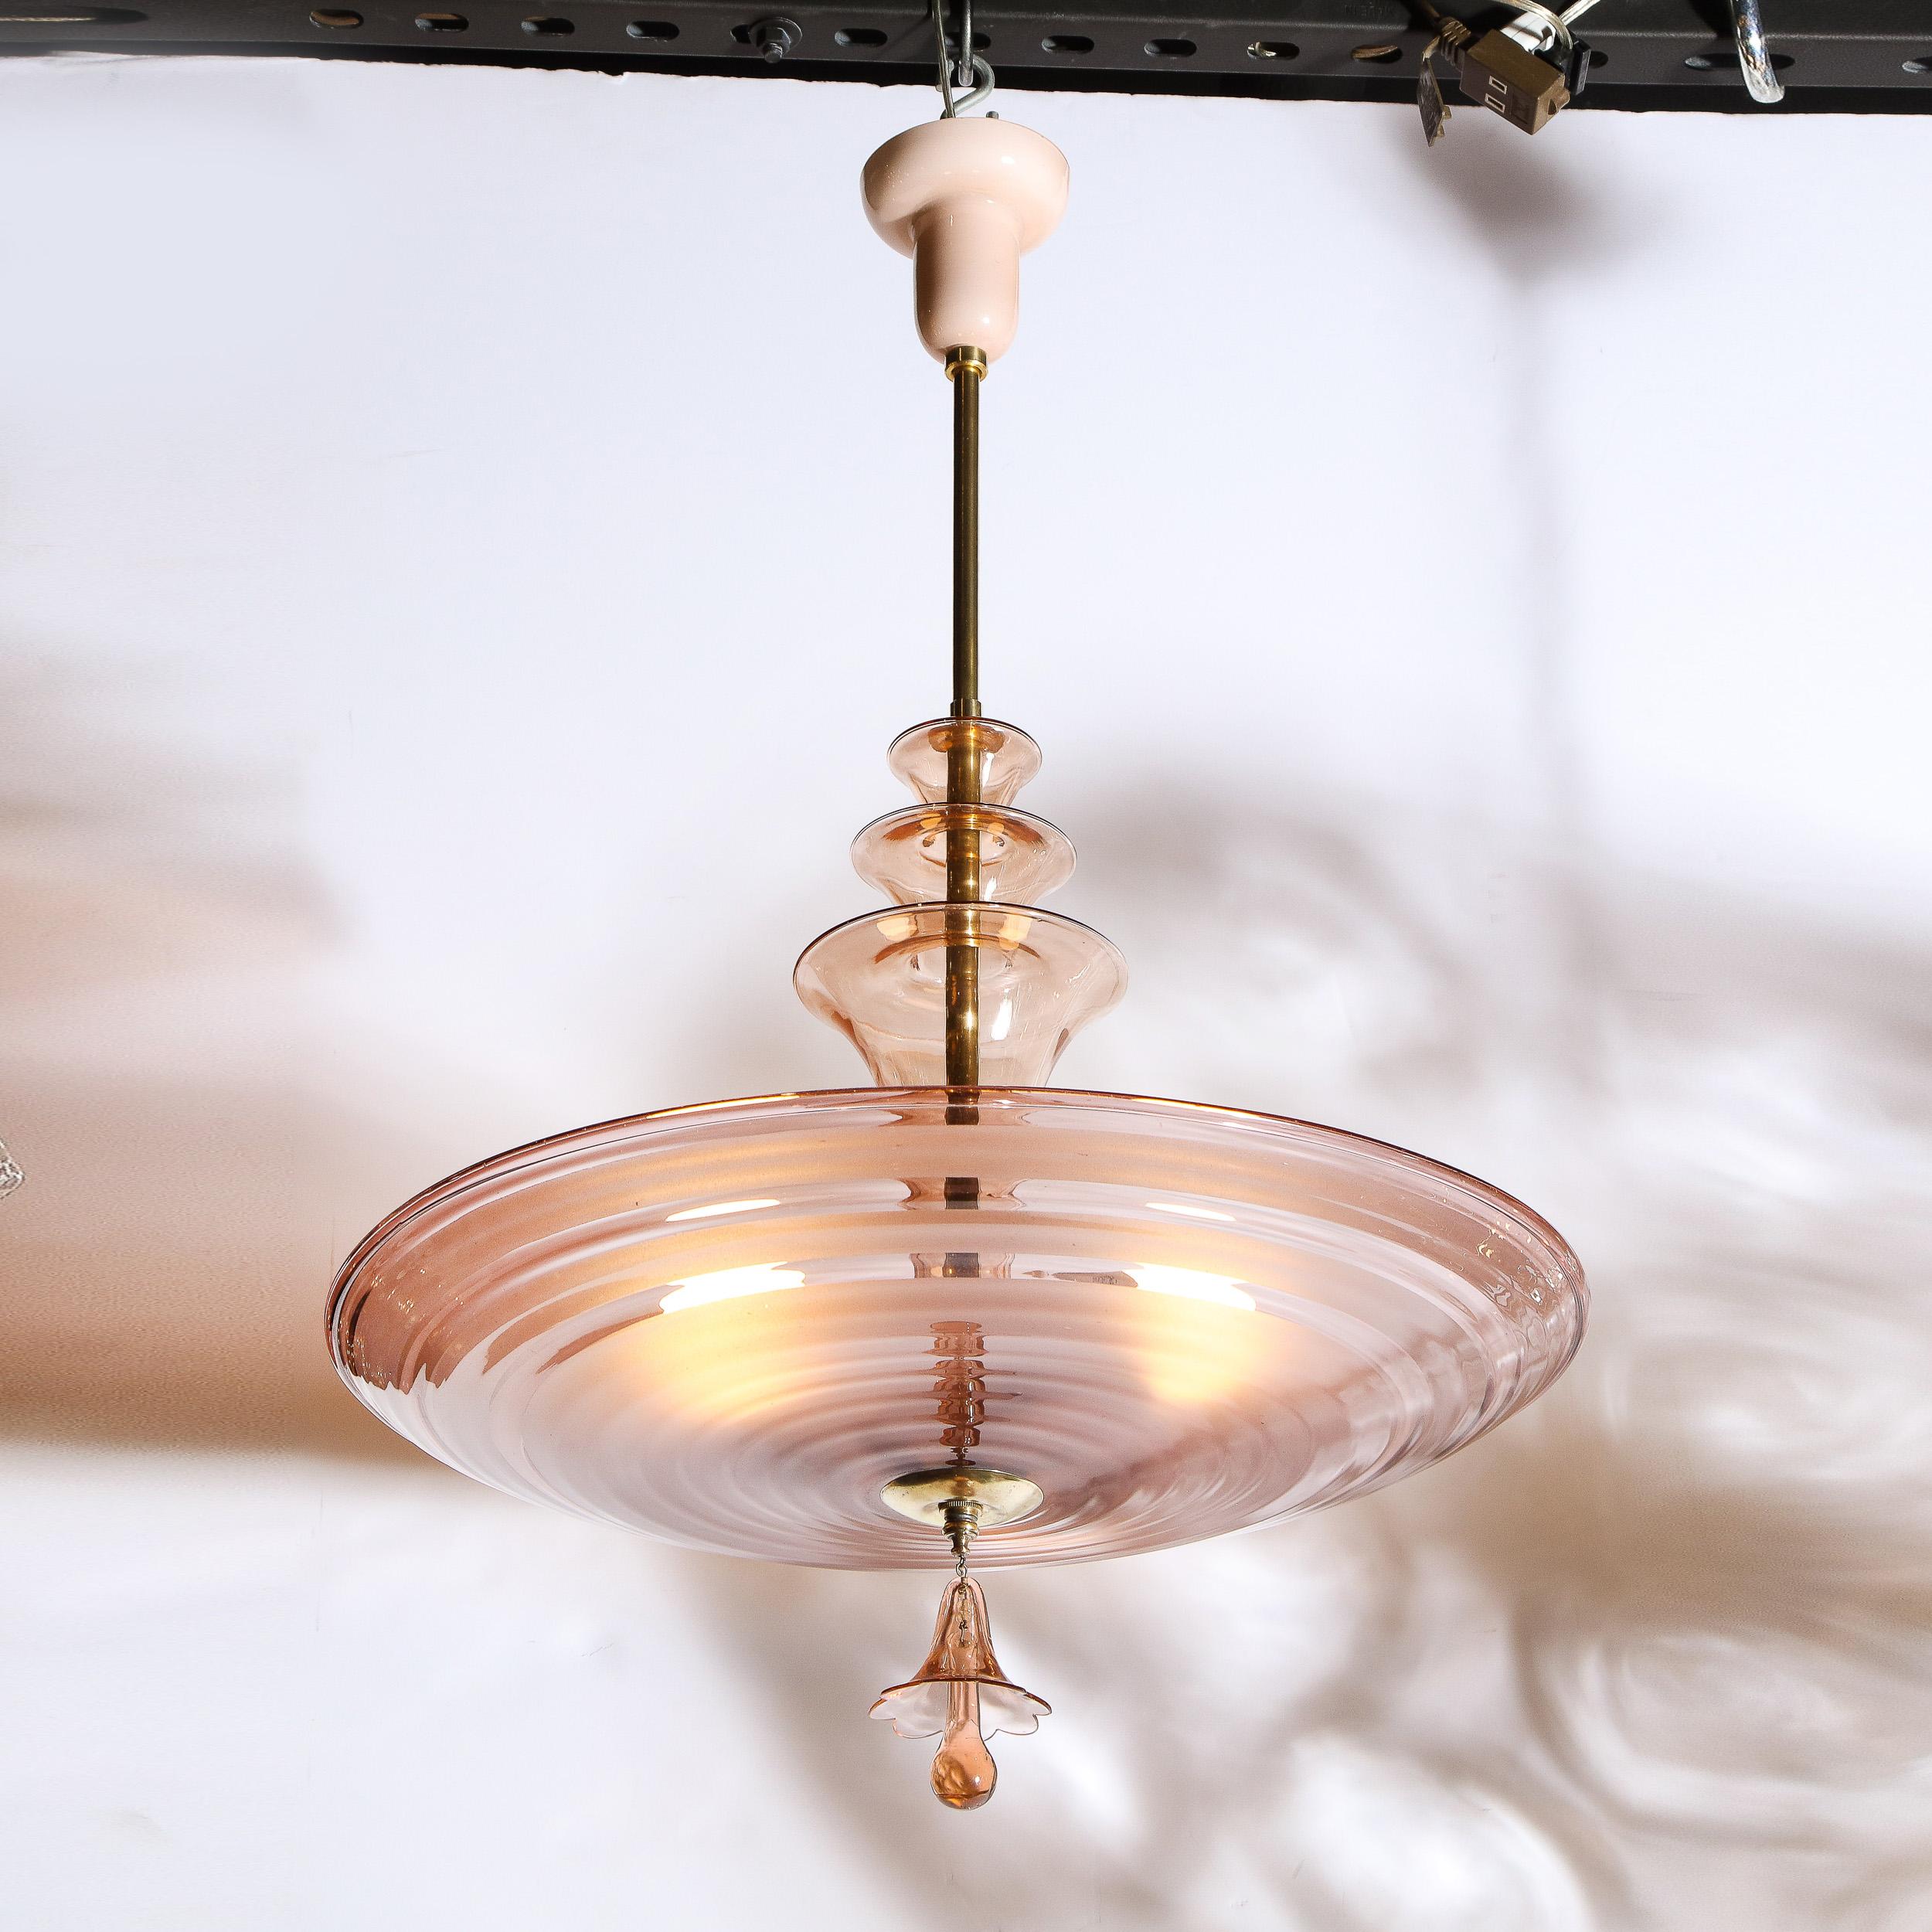 This sophisticated, Art Deco, Machine Age chandelier was created in the France circa 1940. It features a domed, concave bottom composed of alternating frosted and transparent glass. The chandelier attaches to a nippled, opaque glass canopy via the